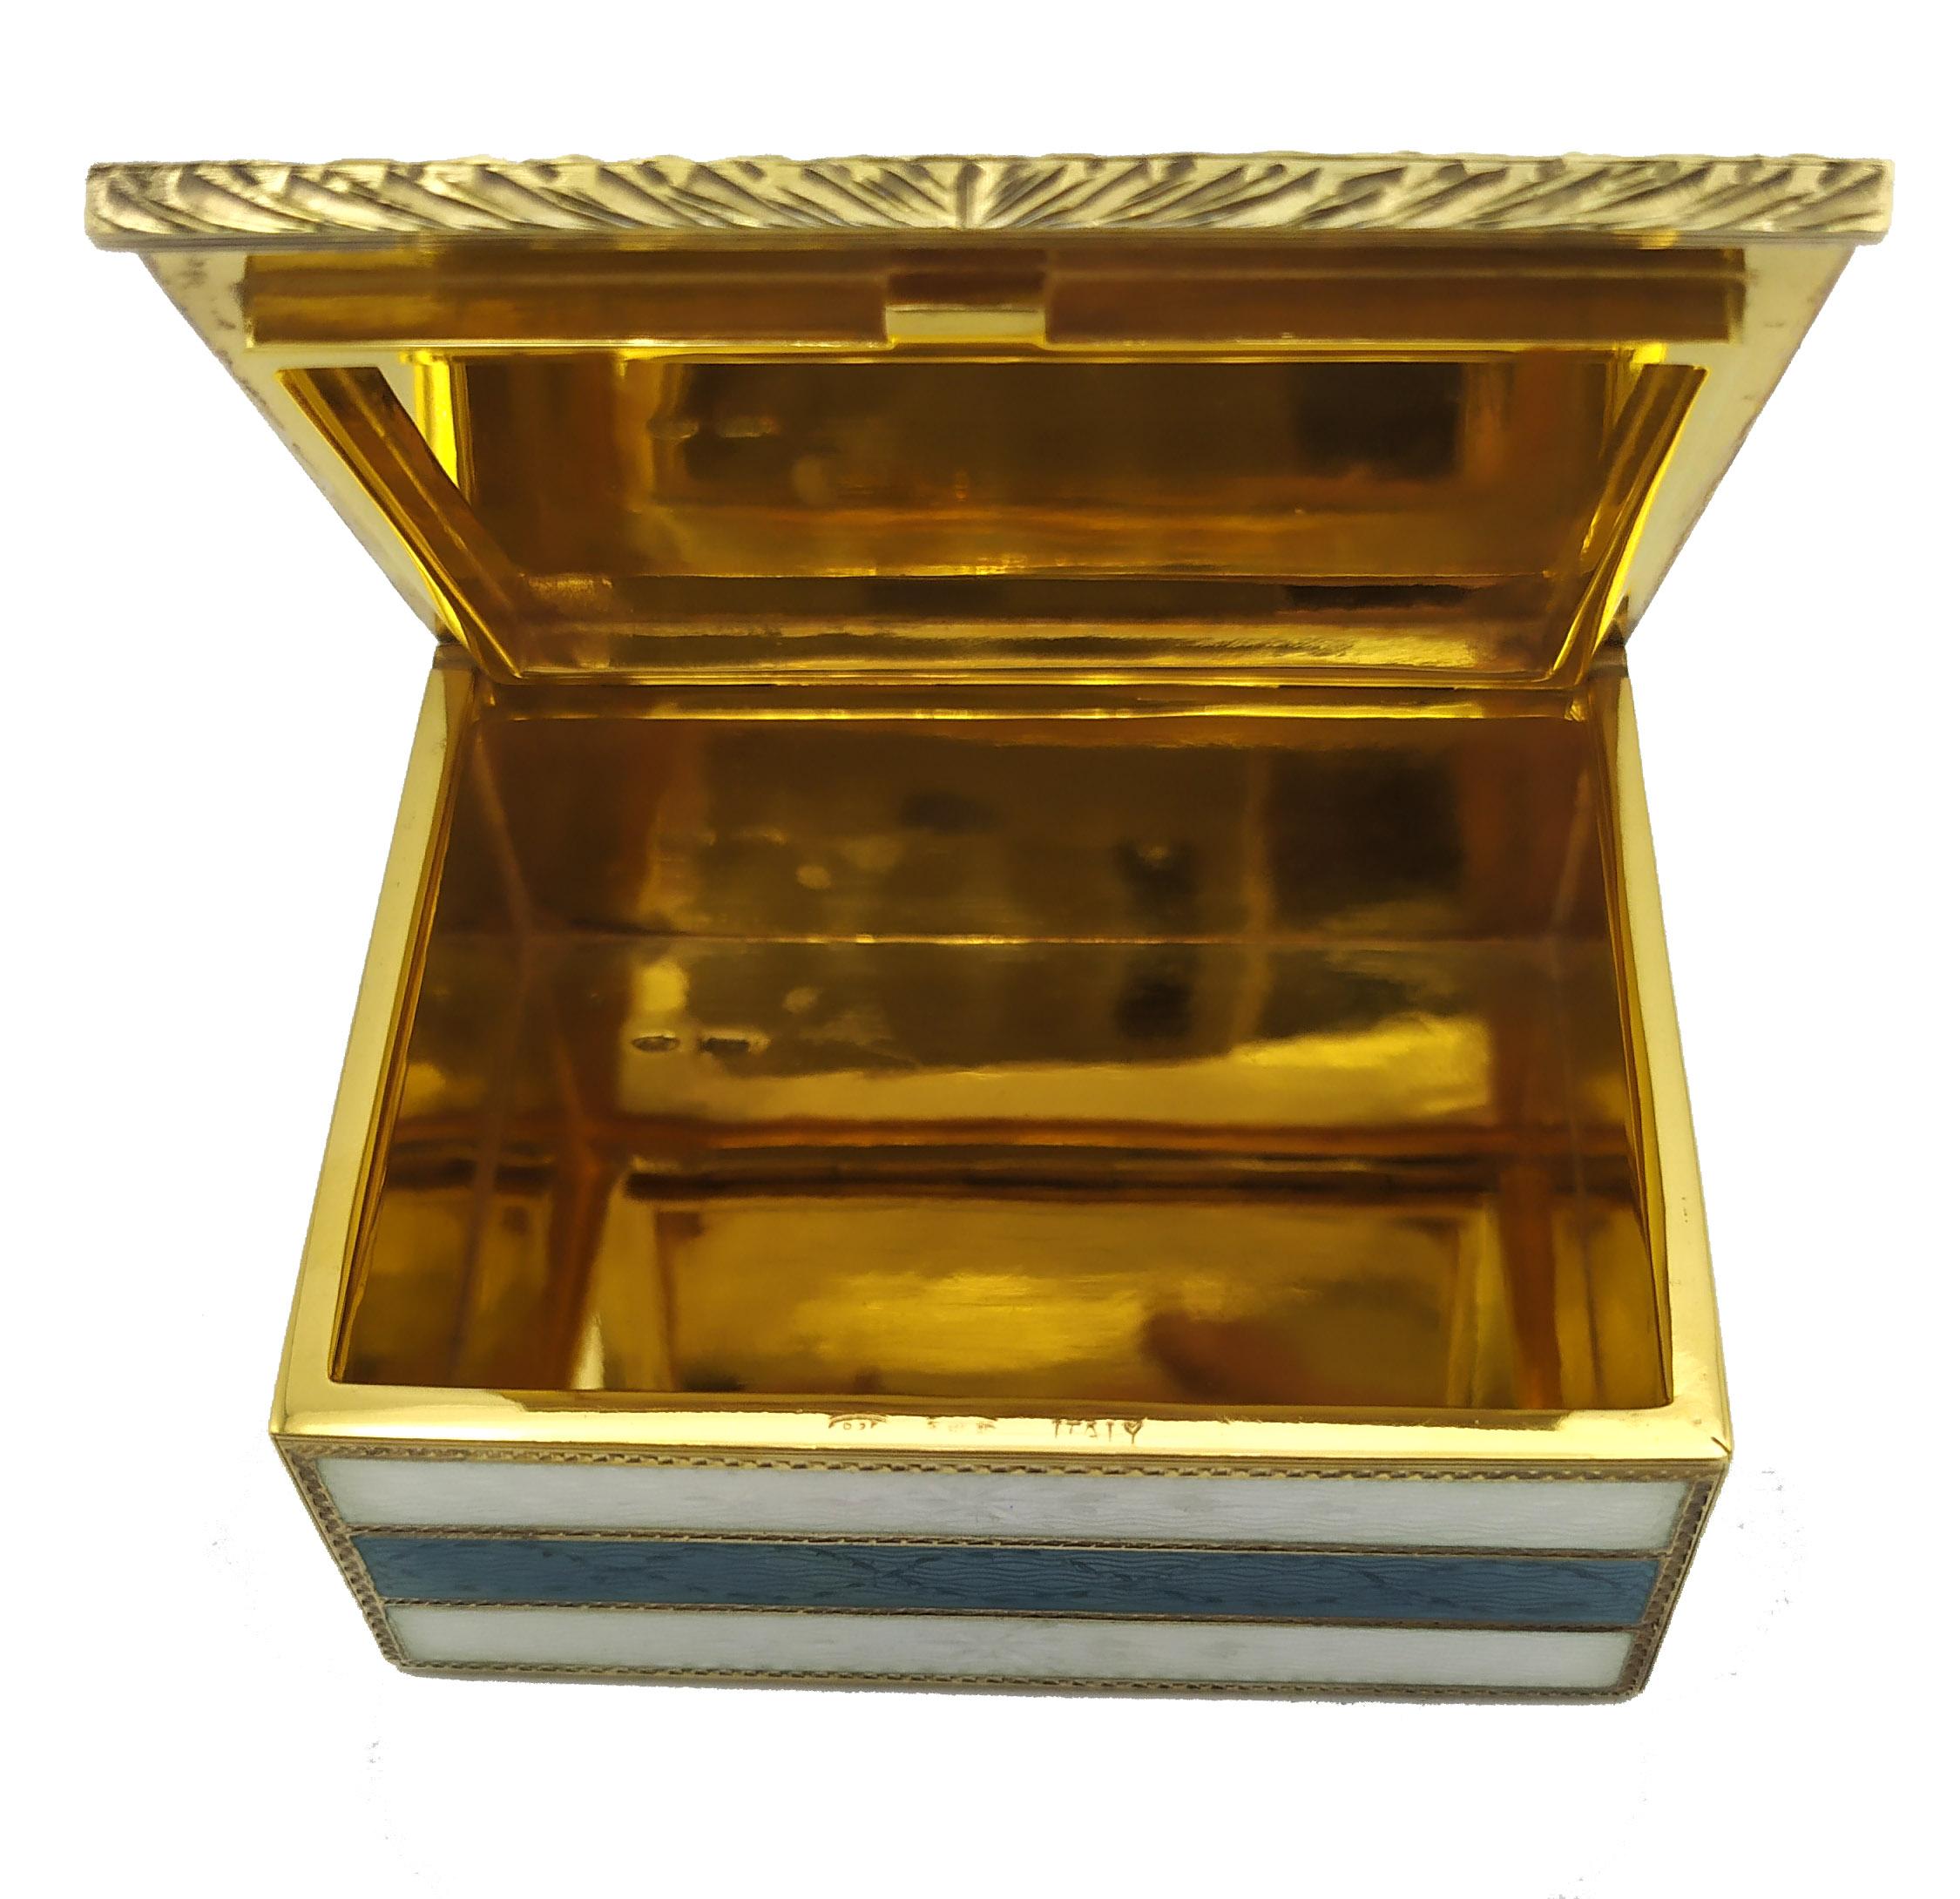 Rectangular snuffbox in 925/1000 sterling silver gold plated with two-tone translucent stripes fired enameled on guillochè and fine hand-engraved on all sides, French Empire Napoleon III style. Dimensions cm. 6 x 7.2 x 3. Designed by Franco